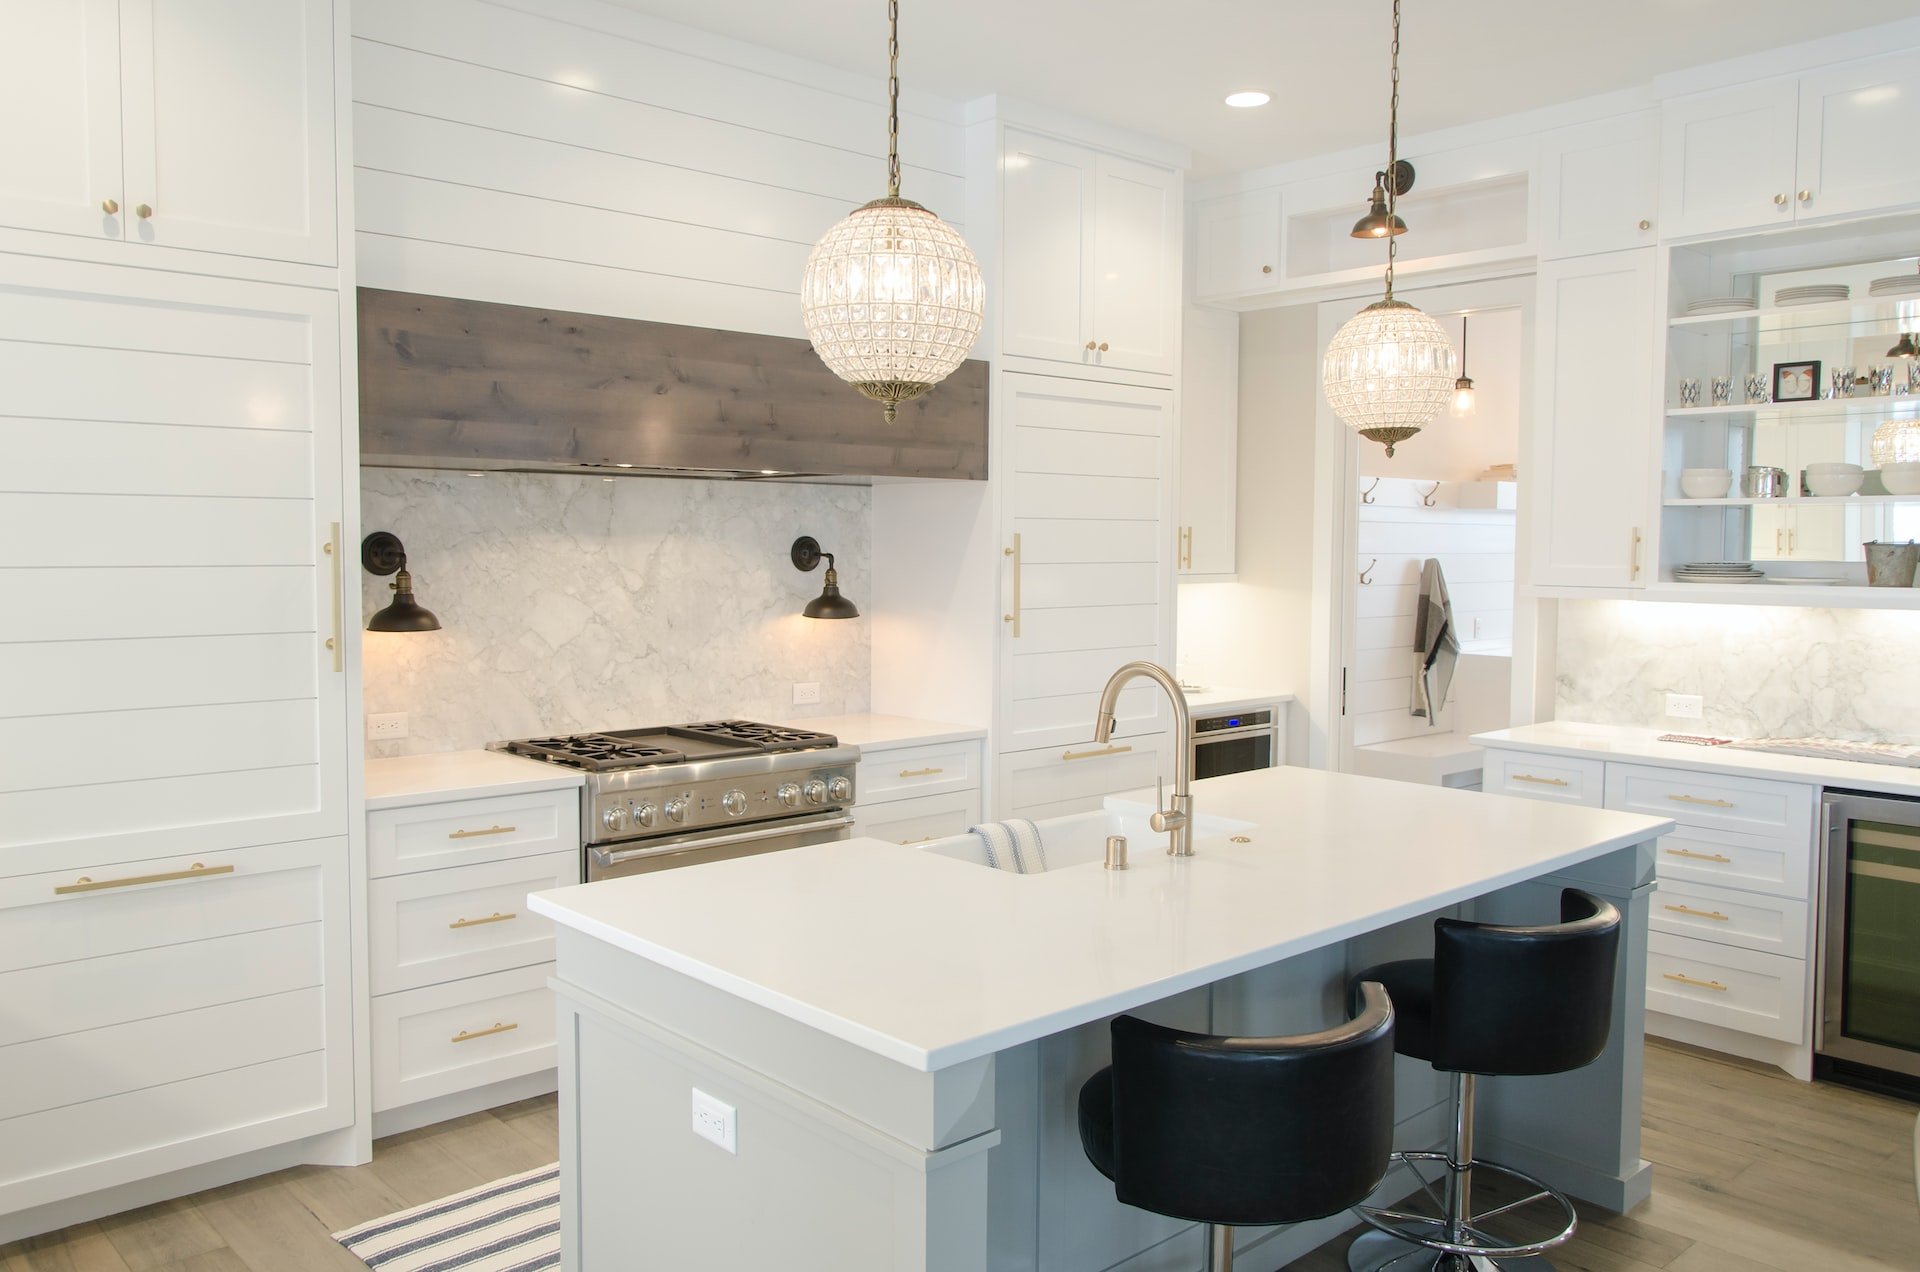 Modern kitchen with white PVC cabinetry